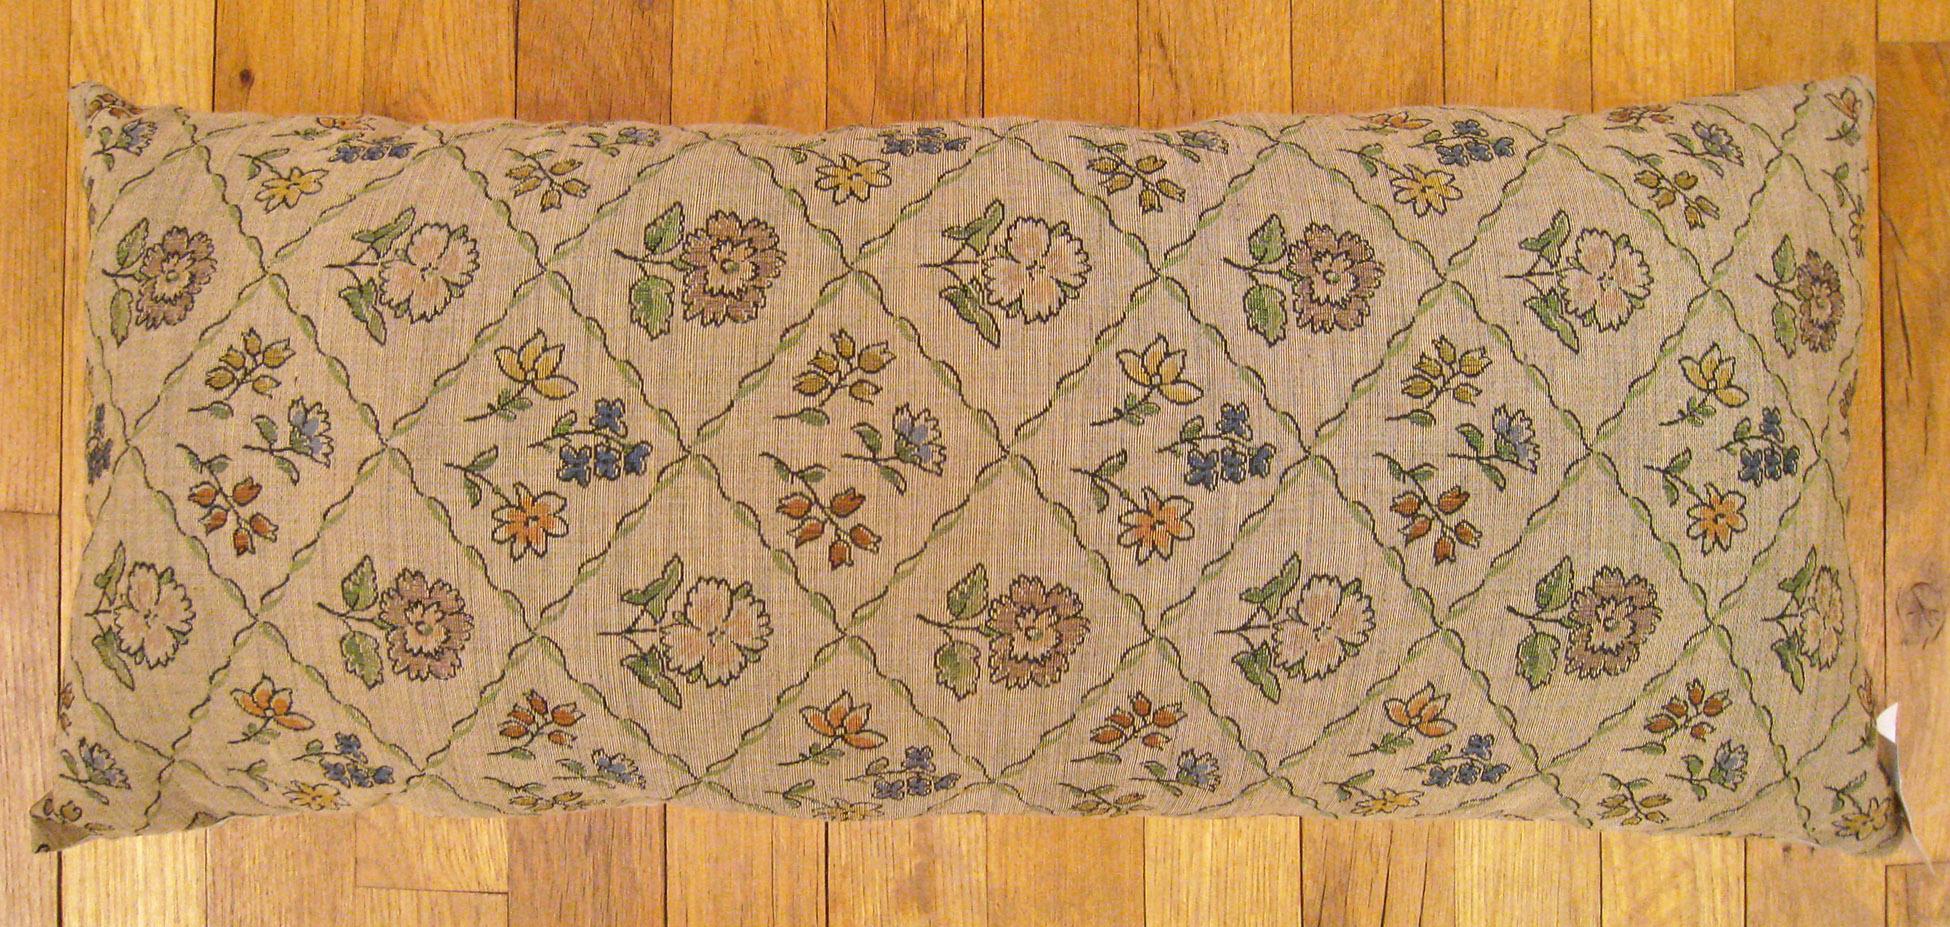 Antique Jacquard Tapestry Pillow; size 1'0” x 2'2”.

An antique decorative pillow with floral elements allover a blue green central field, size 1'0